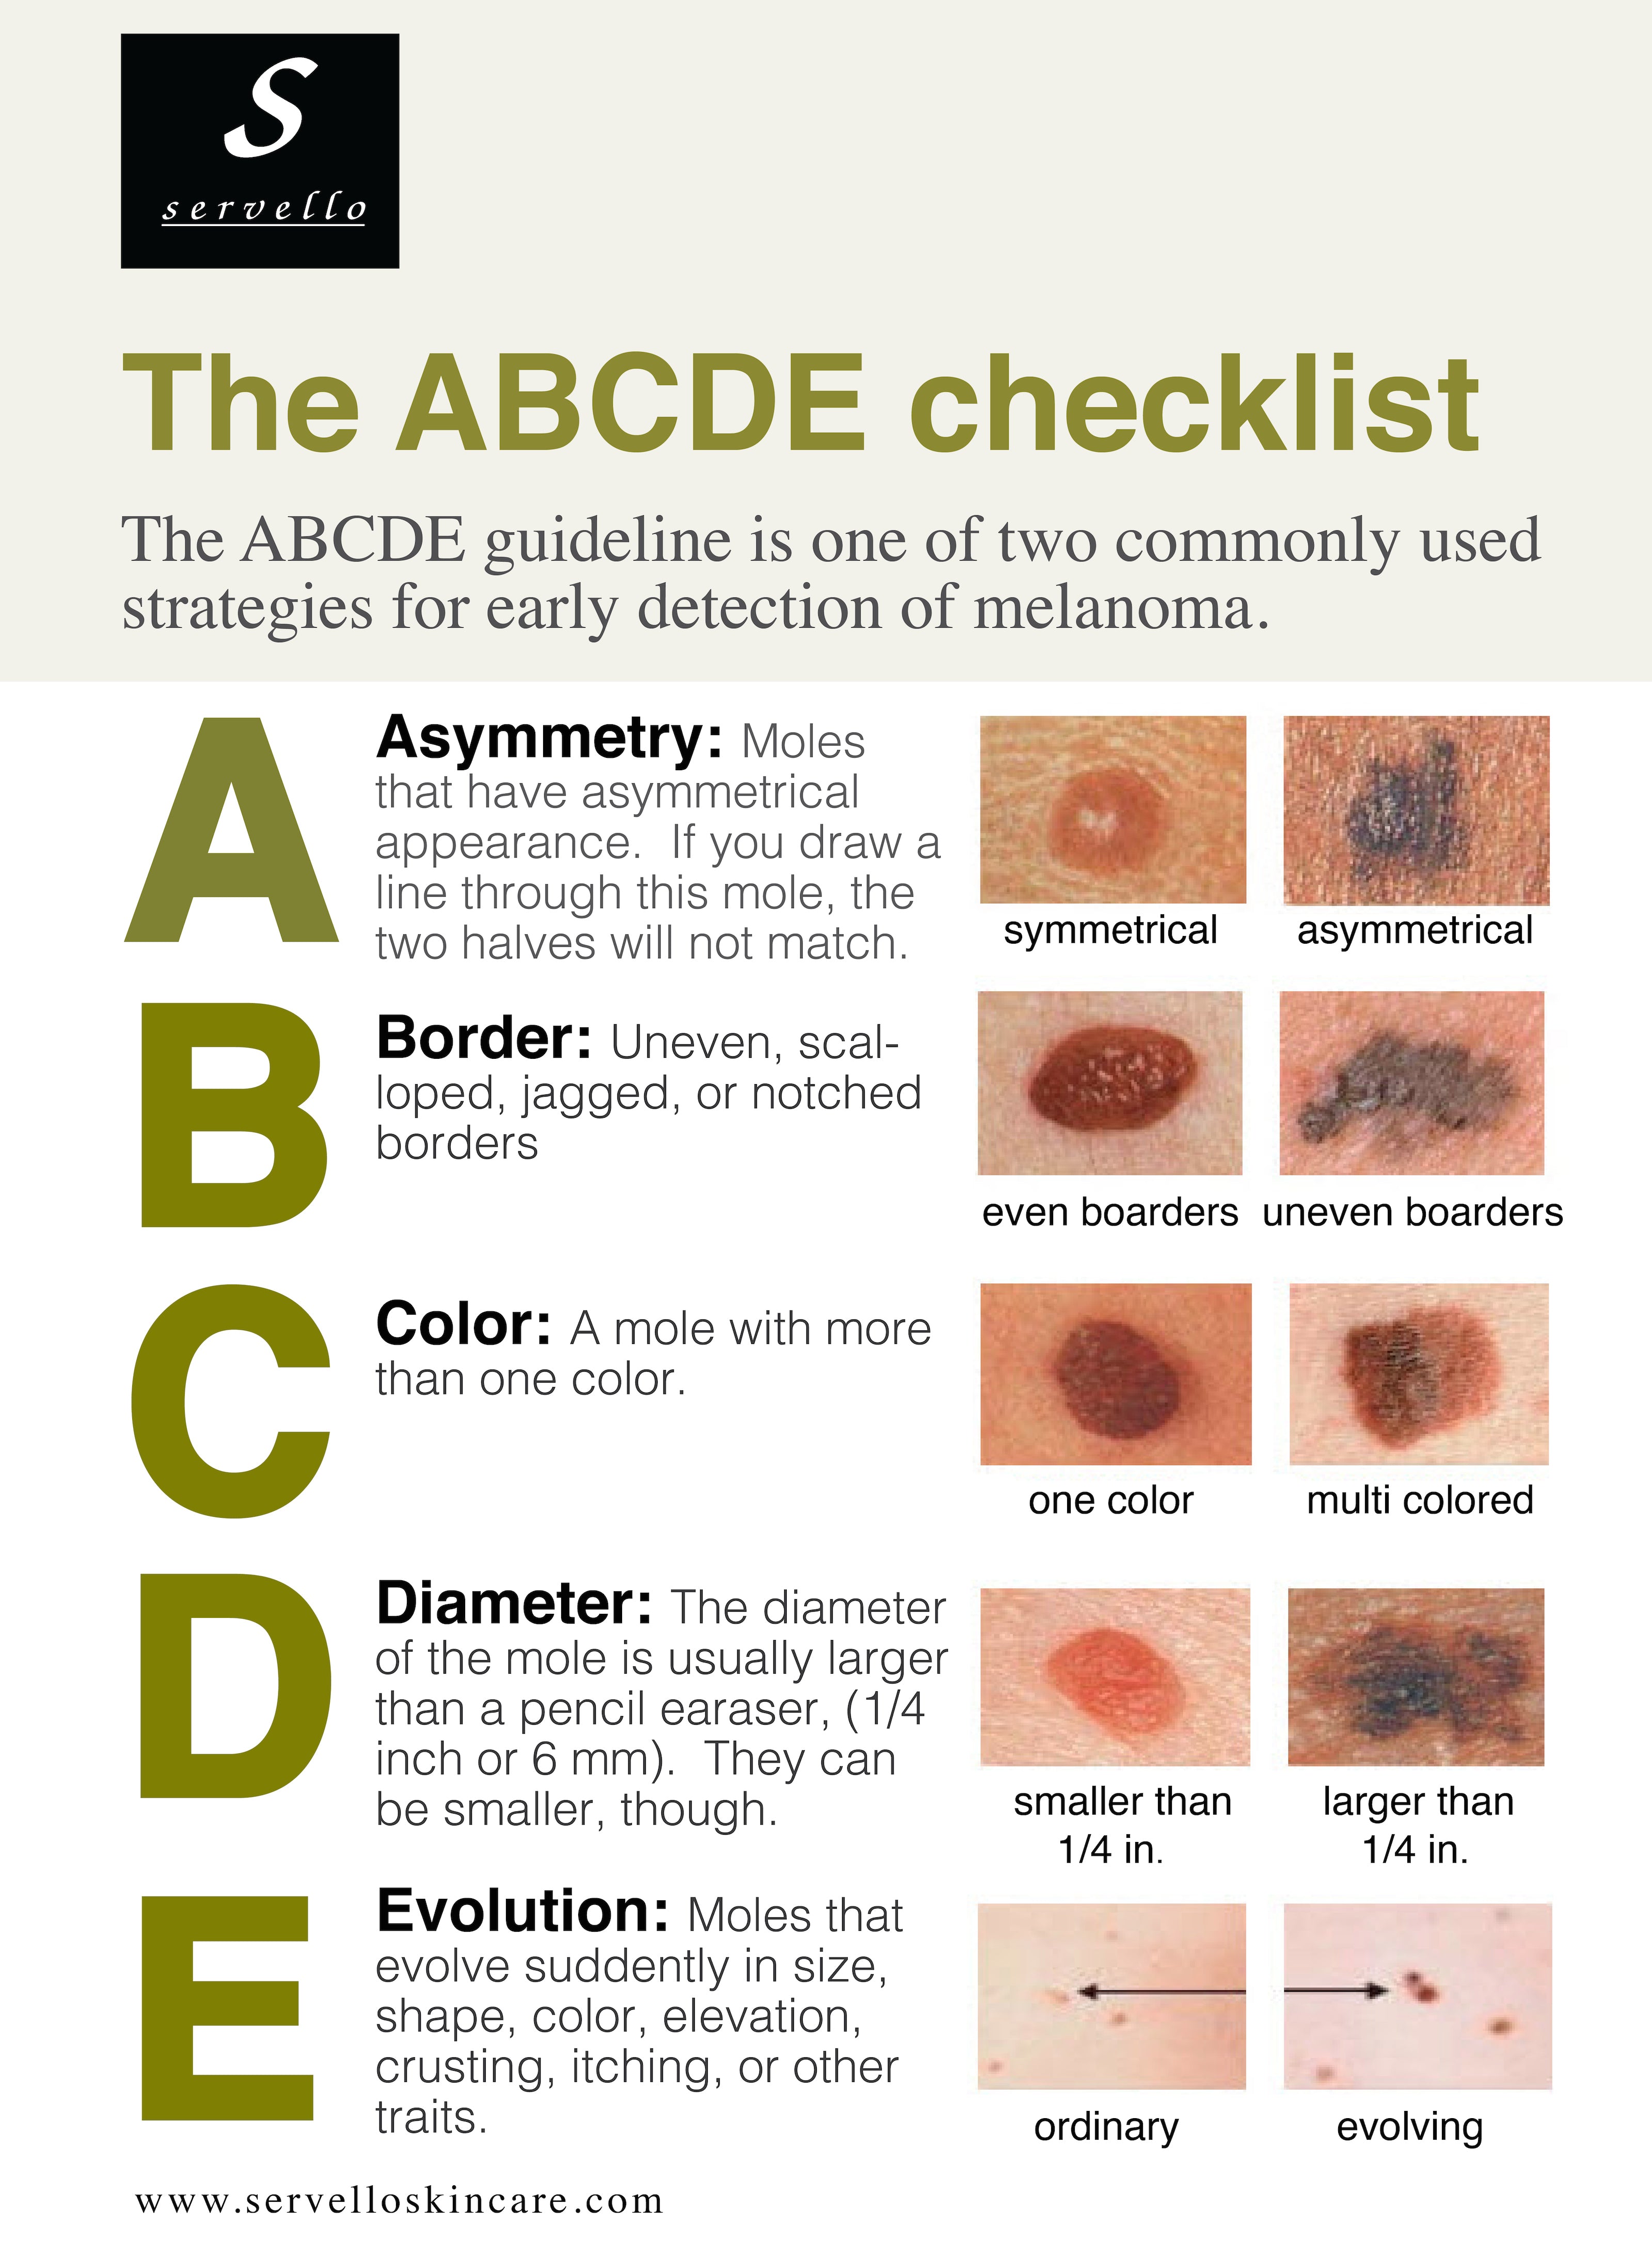 The ABCDE's of Skin Cancer